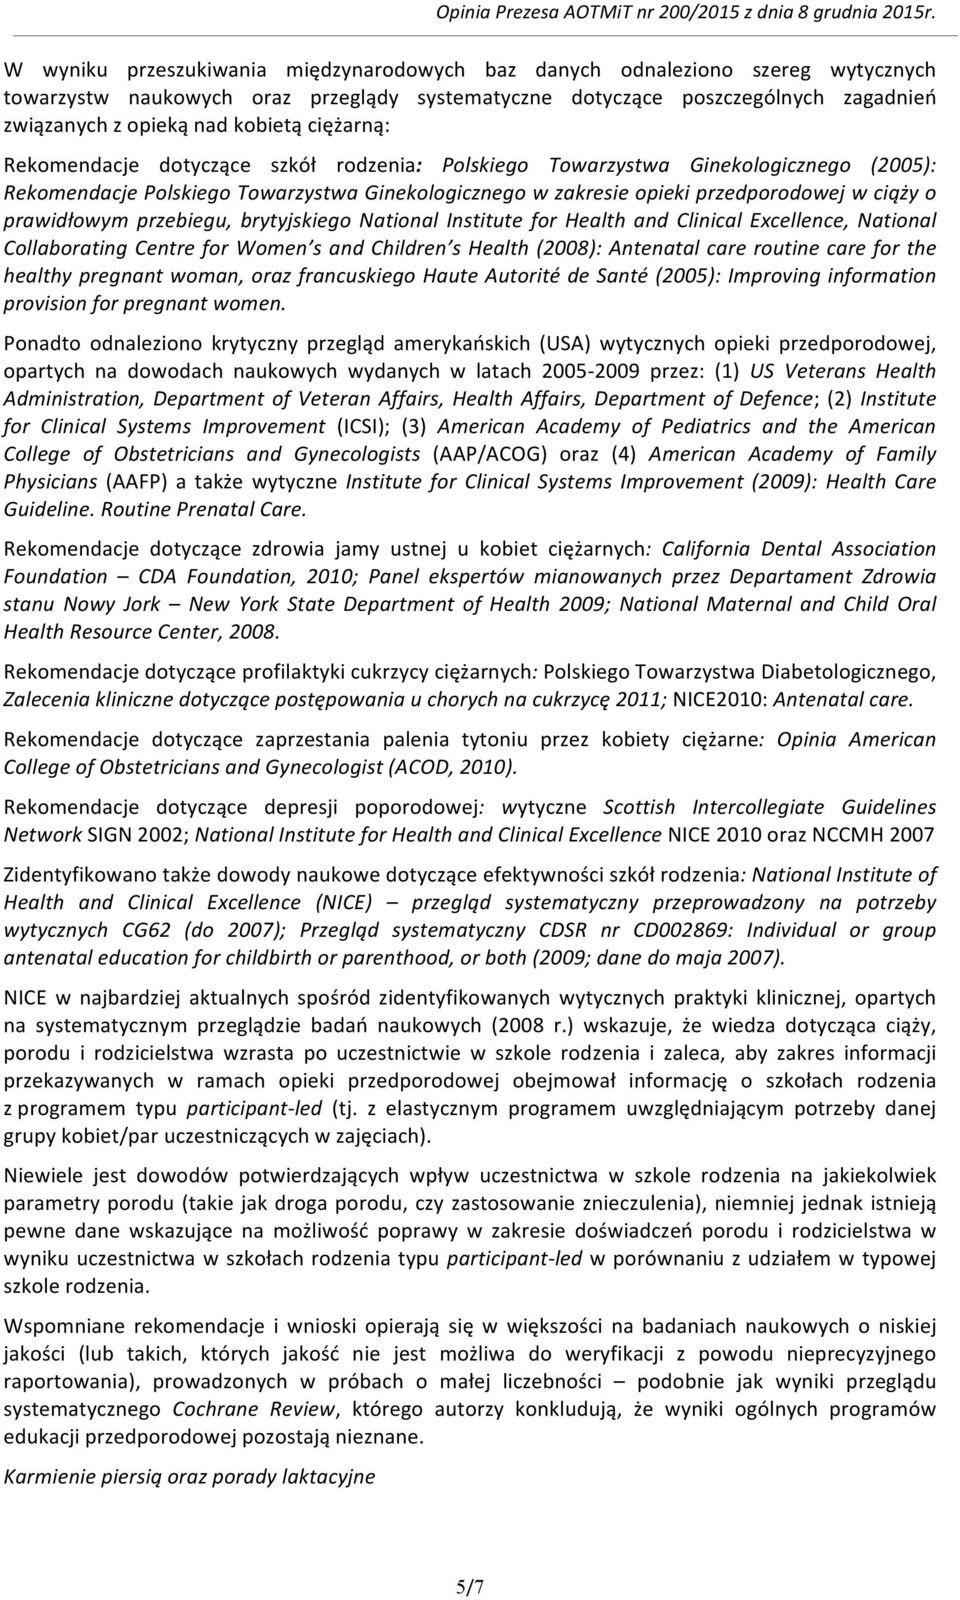 prawidłowym przebiegu, brytyjskiego National Institute for Health and Clinical Excellence, National Collaborating Centre for Women s and Children s Health (2008): Antenatal care routine care for the